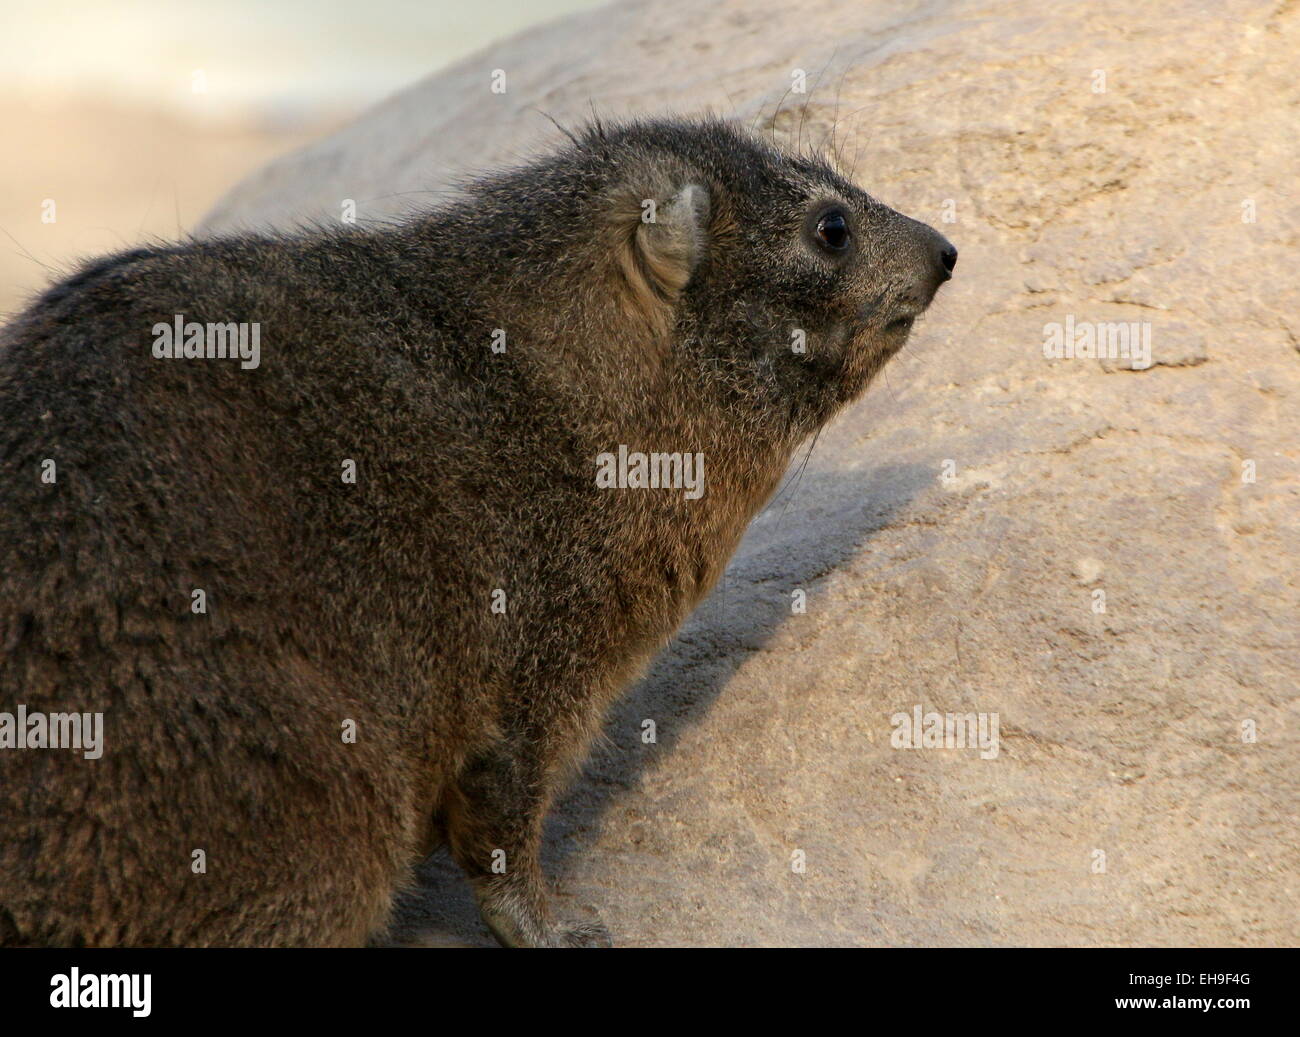 South African Cape or rock hyrax (Procavia capensis), a.k.a. Rock badger or 'Dassie' Stock Photo